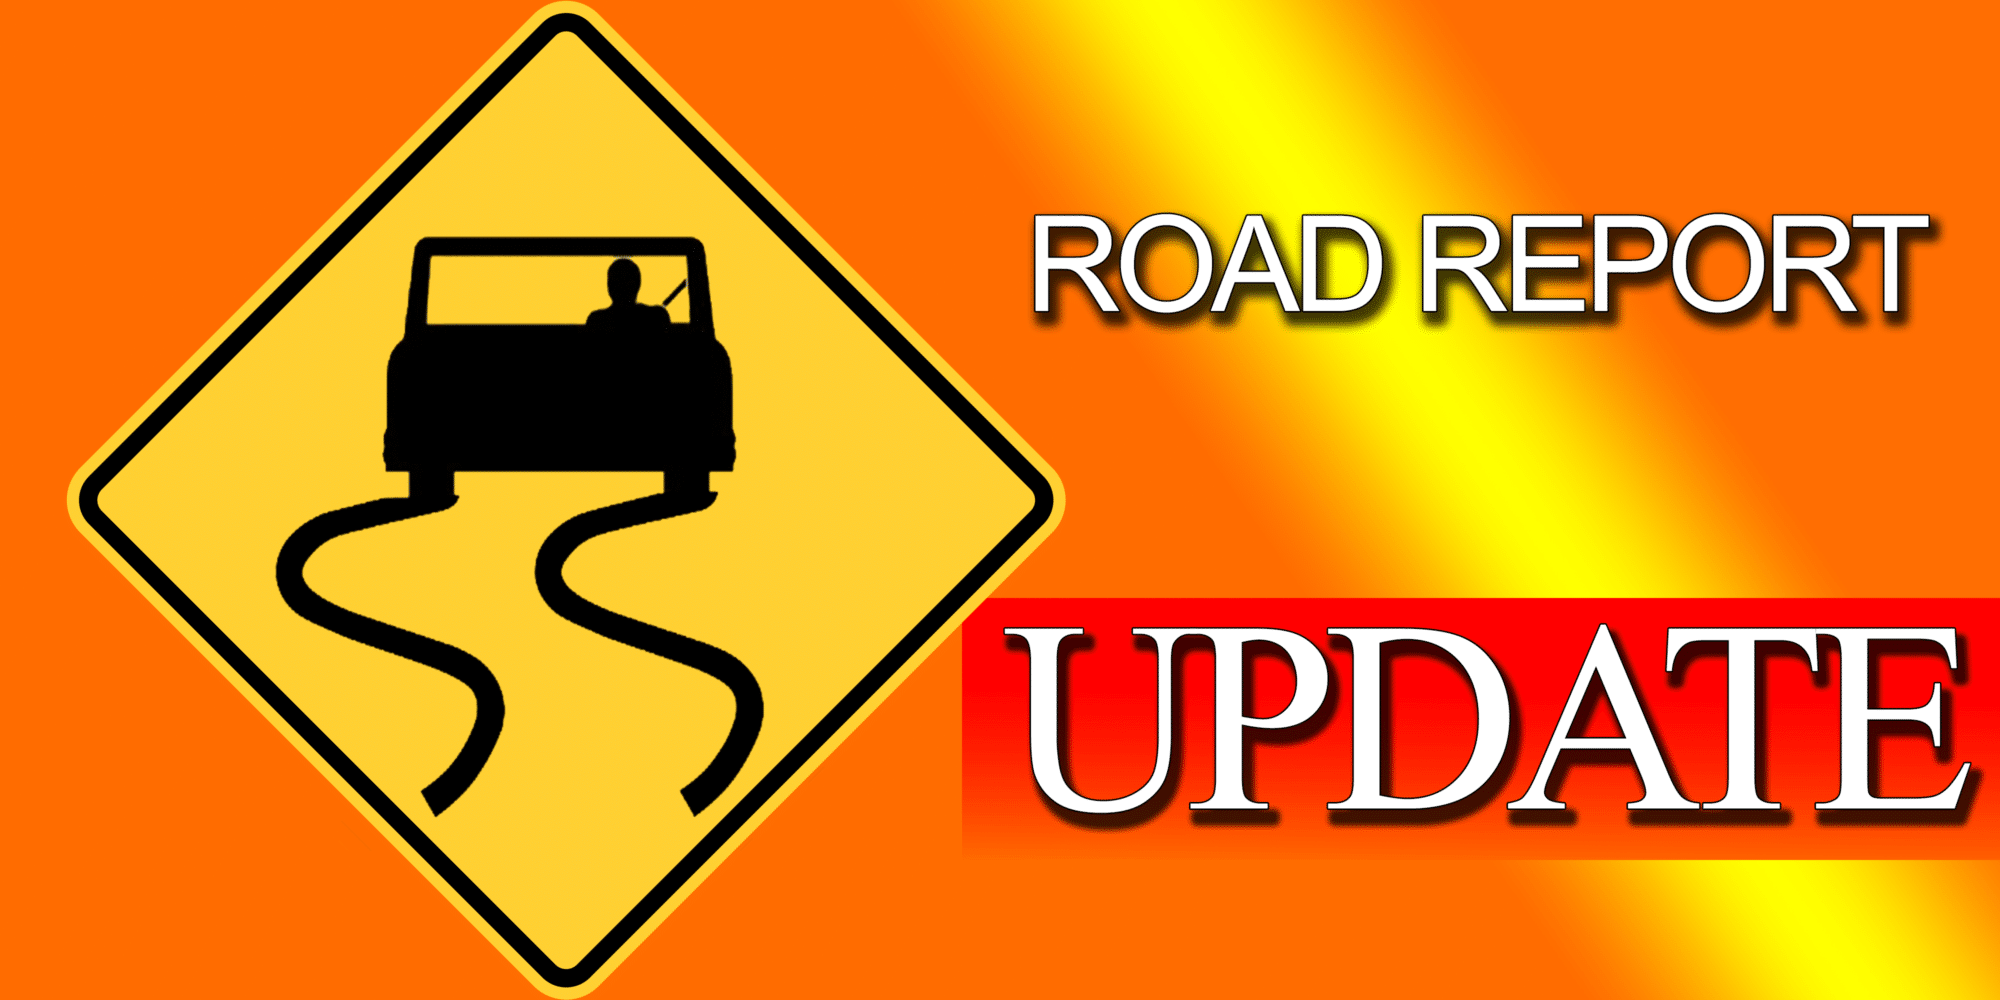 Road condition update